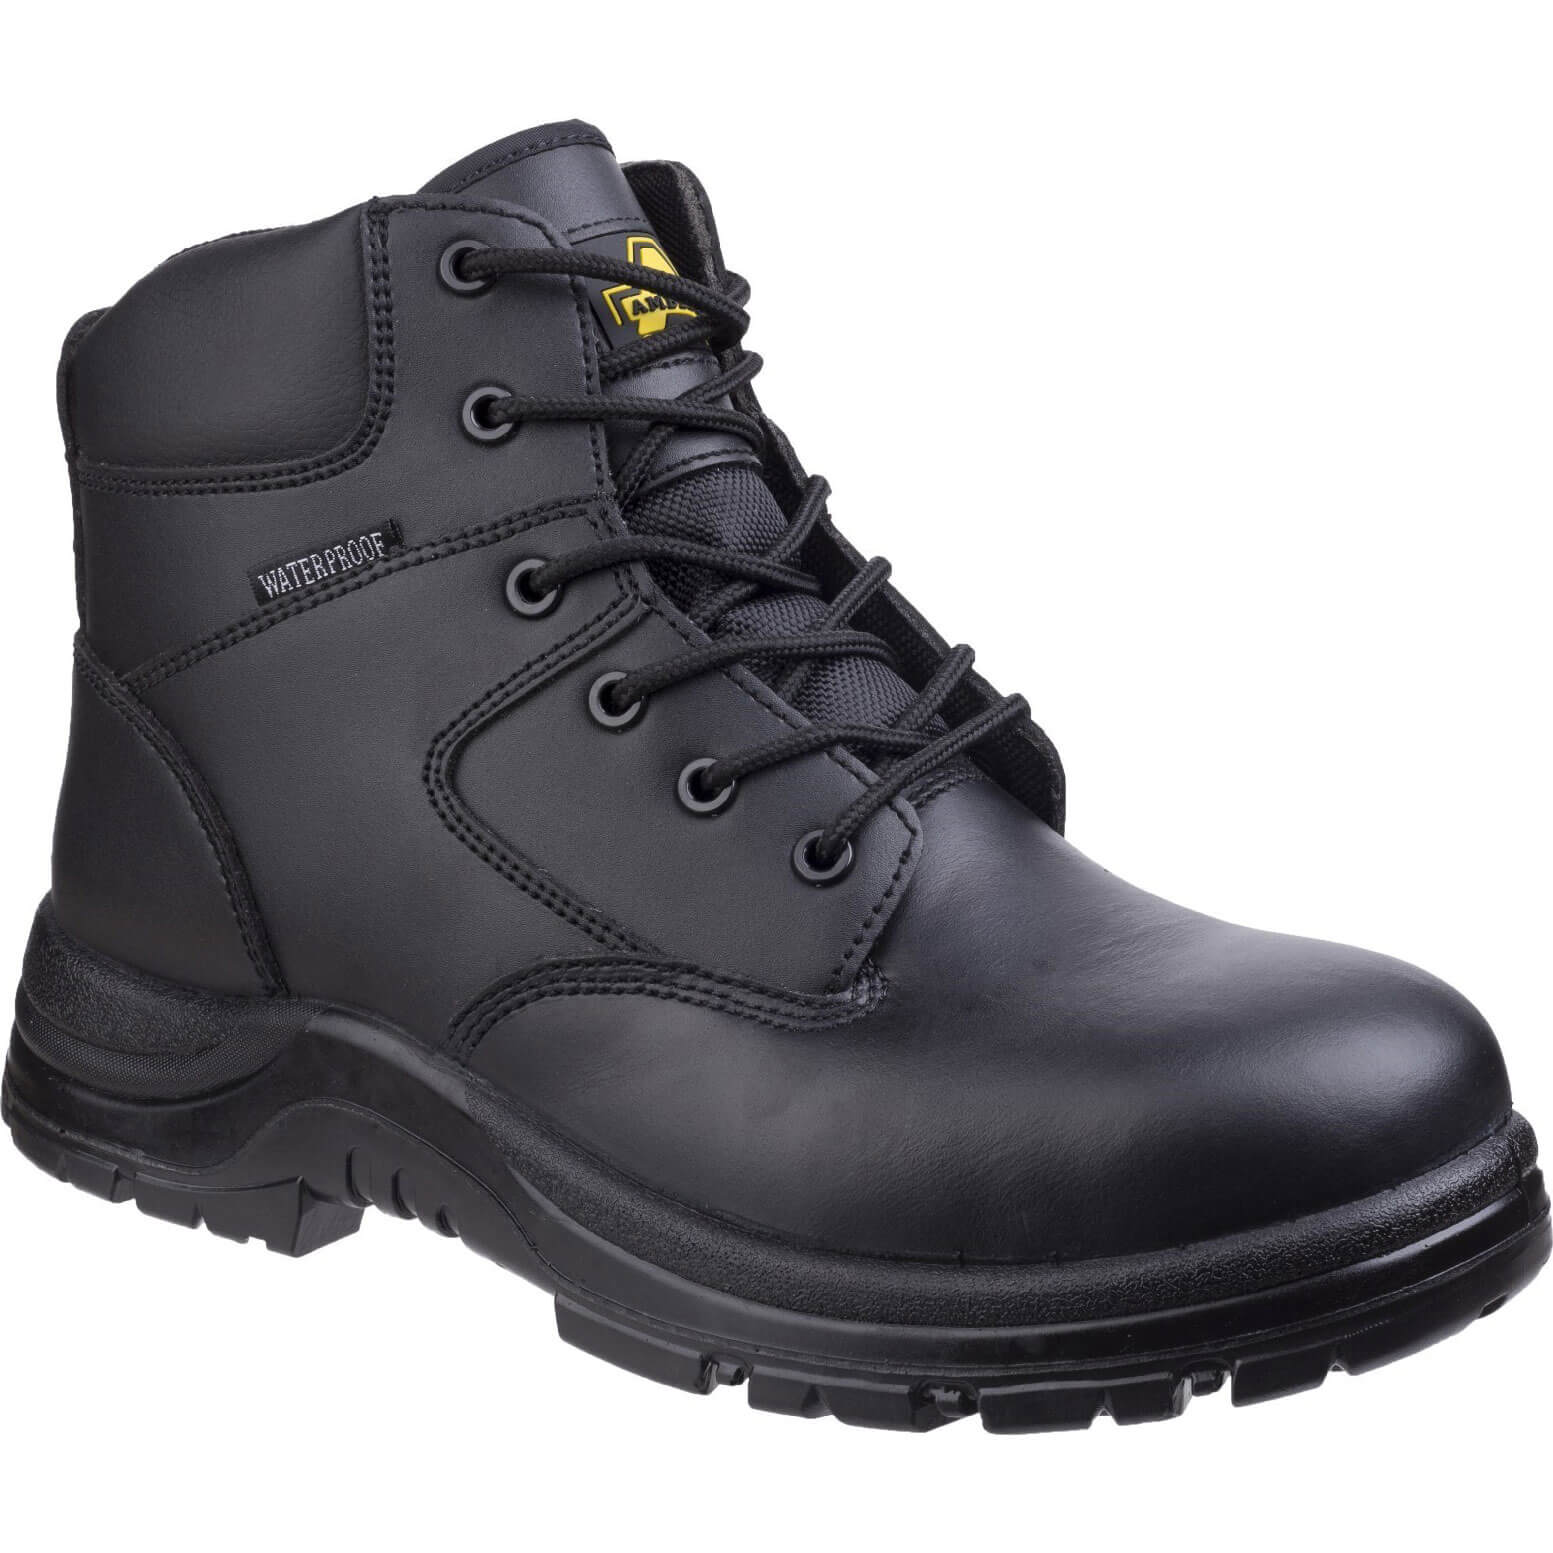 Image of Amblers Safety FS006C Metal Free Waterproof Safety Boots Black Size 11